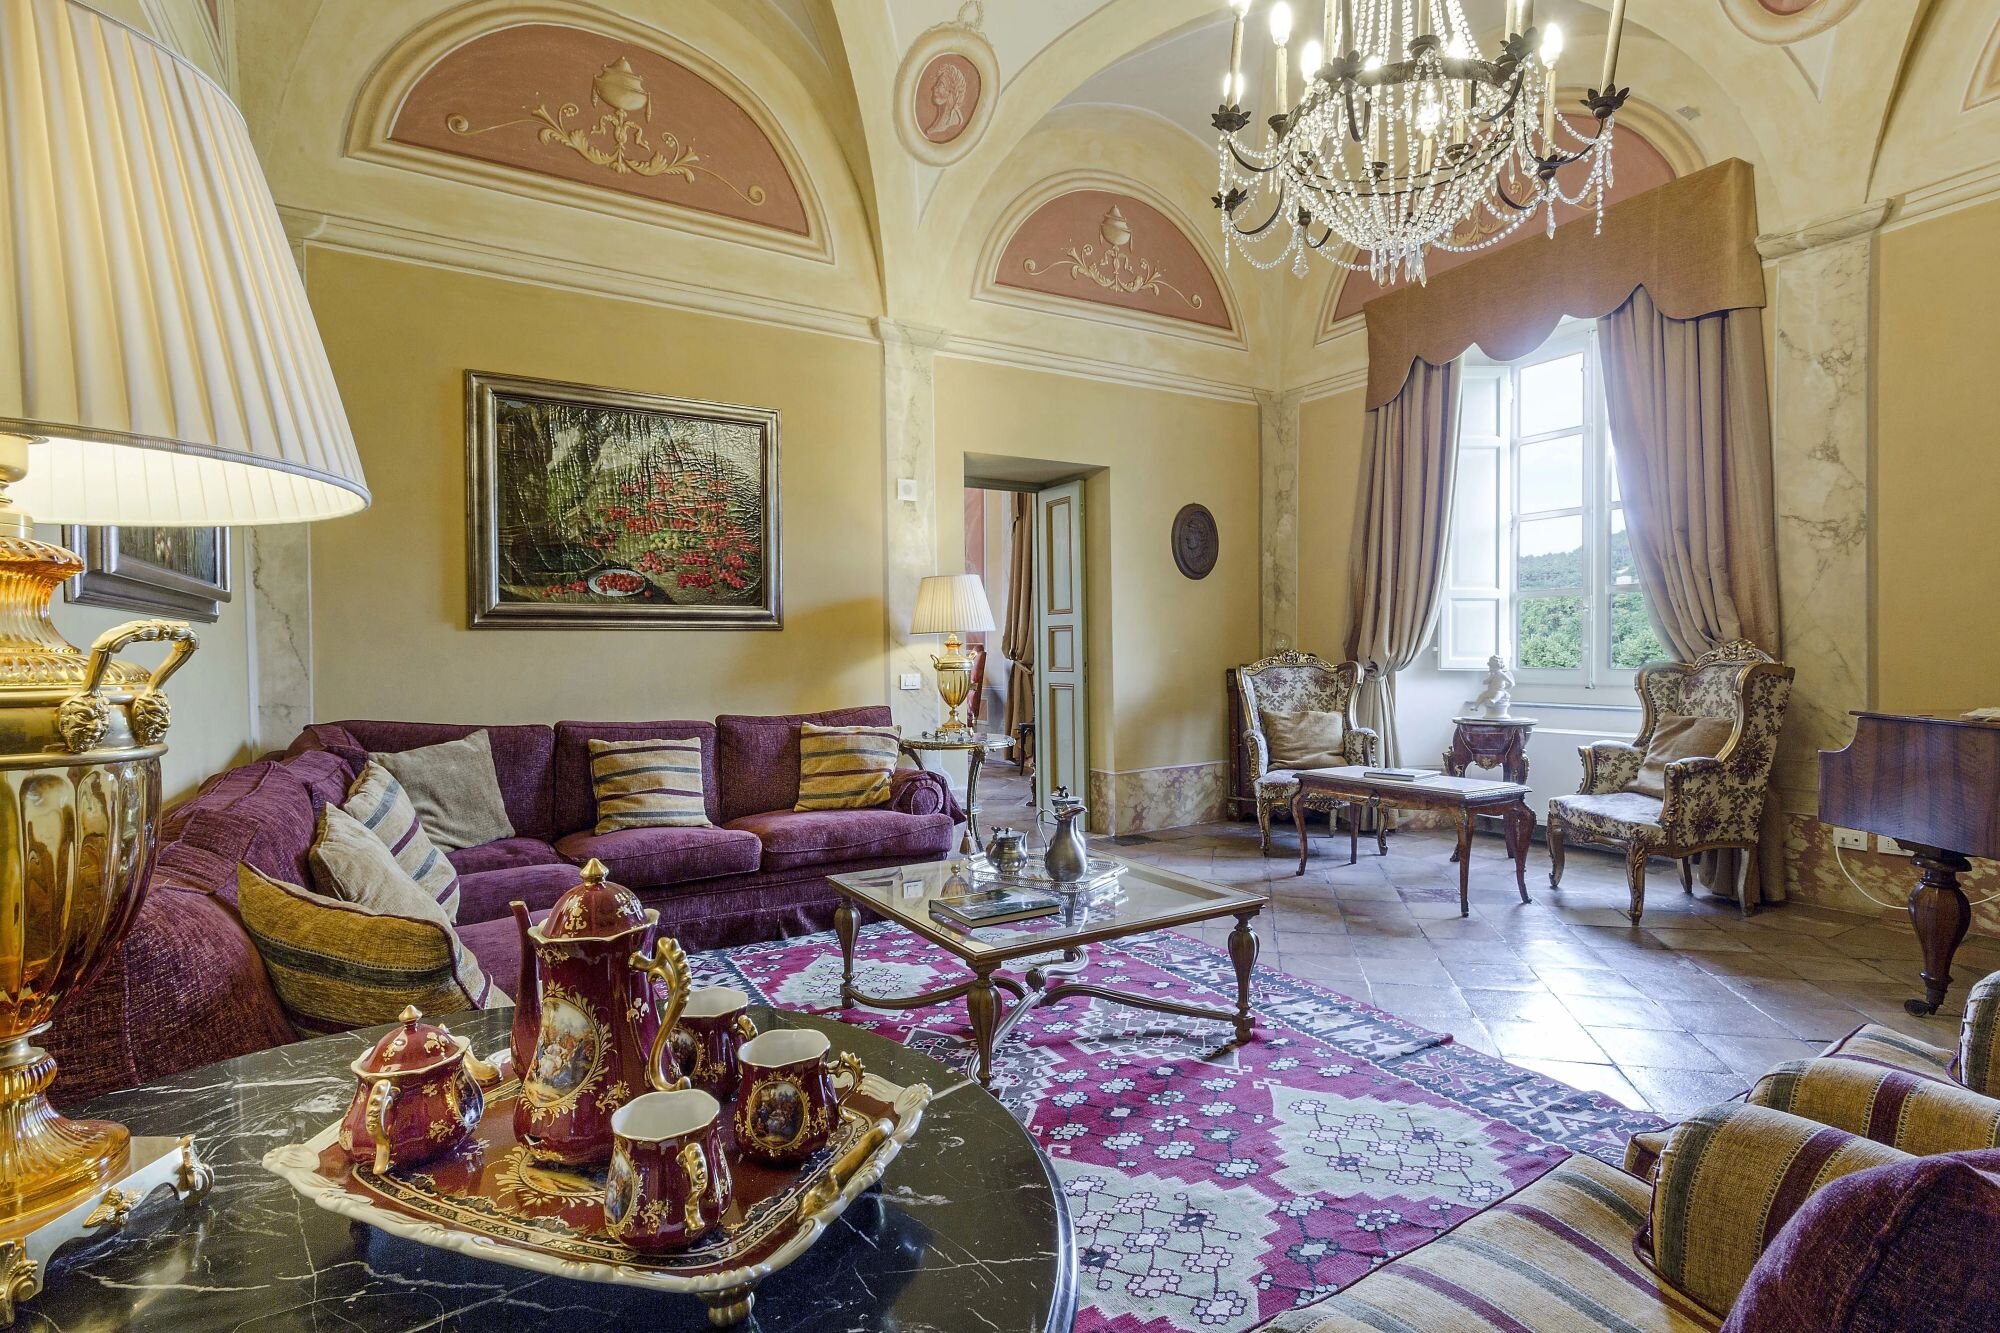 Francis York A Portfolio of Luxury Tuscan Villa Rentals is Coming to Auction17.jpeg